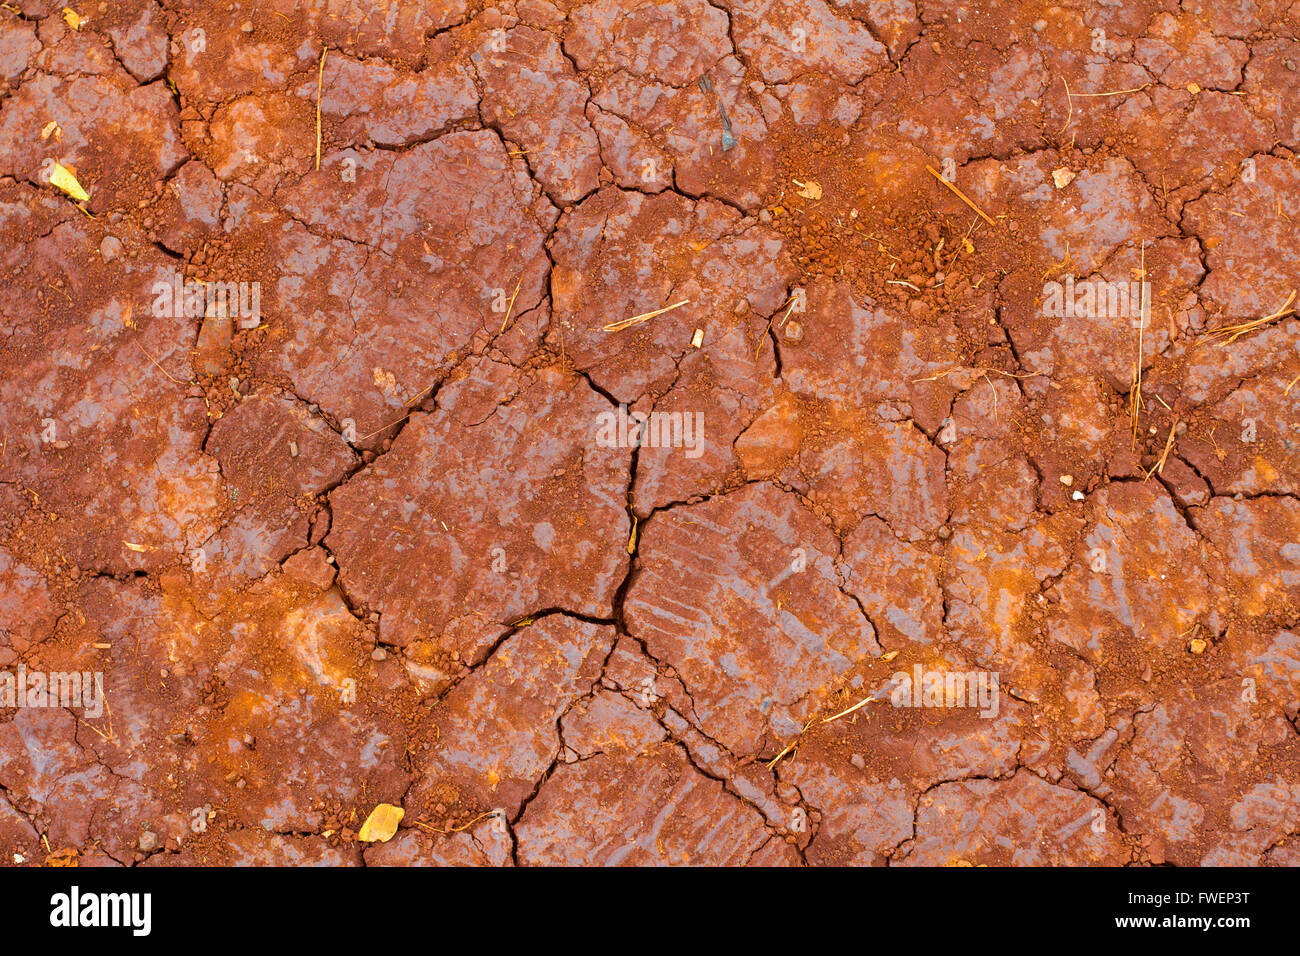 Quarry Red Clay Texture. Germany Stock Photo, Picture and Royalty Free  Image. Image 84390986.